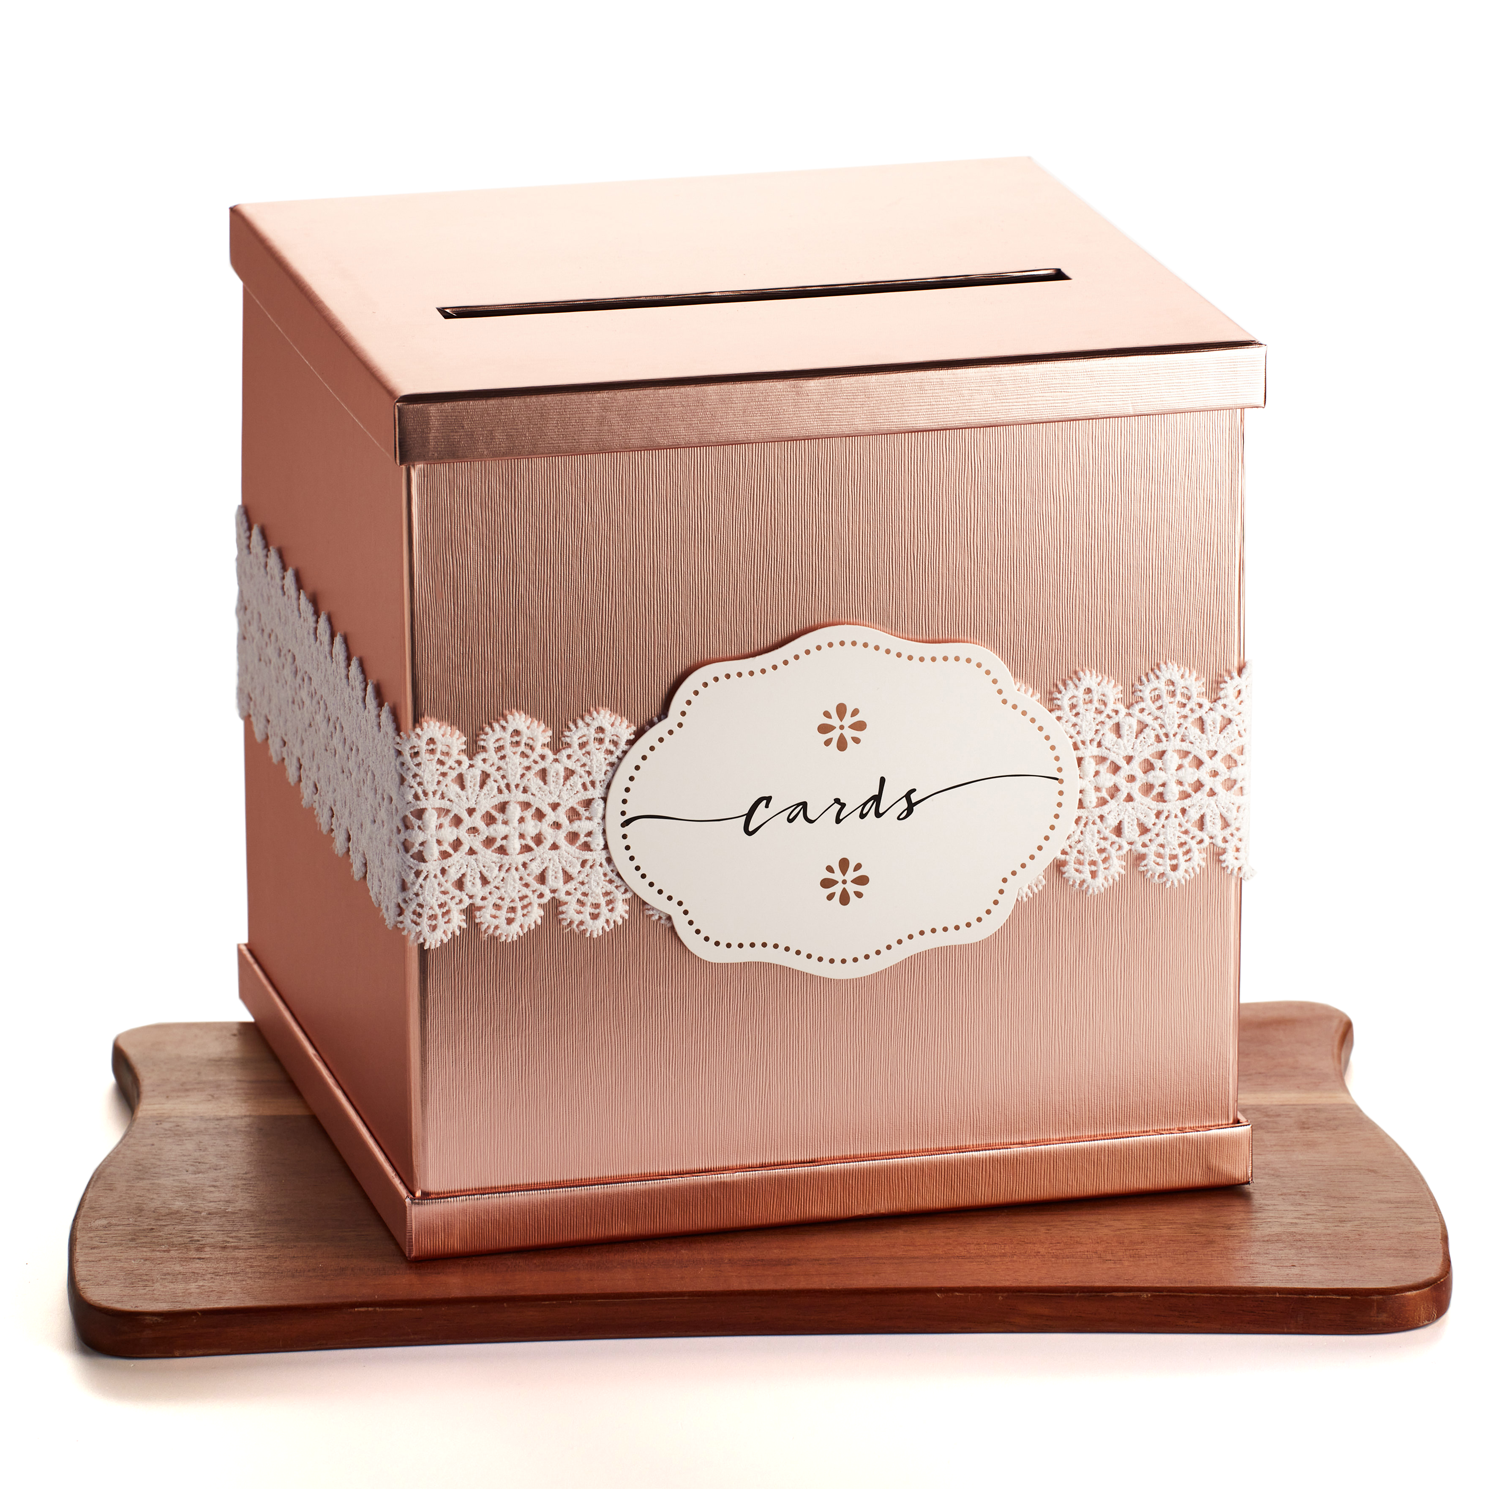 Rose Gold Gift Card Box with White Lace – Large Size 10″ x 10″